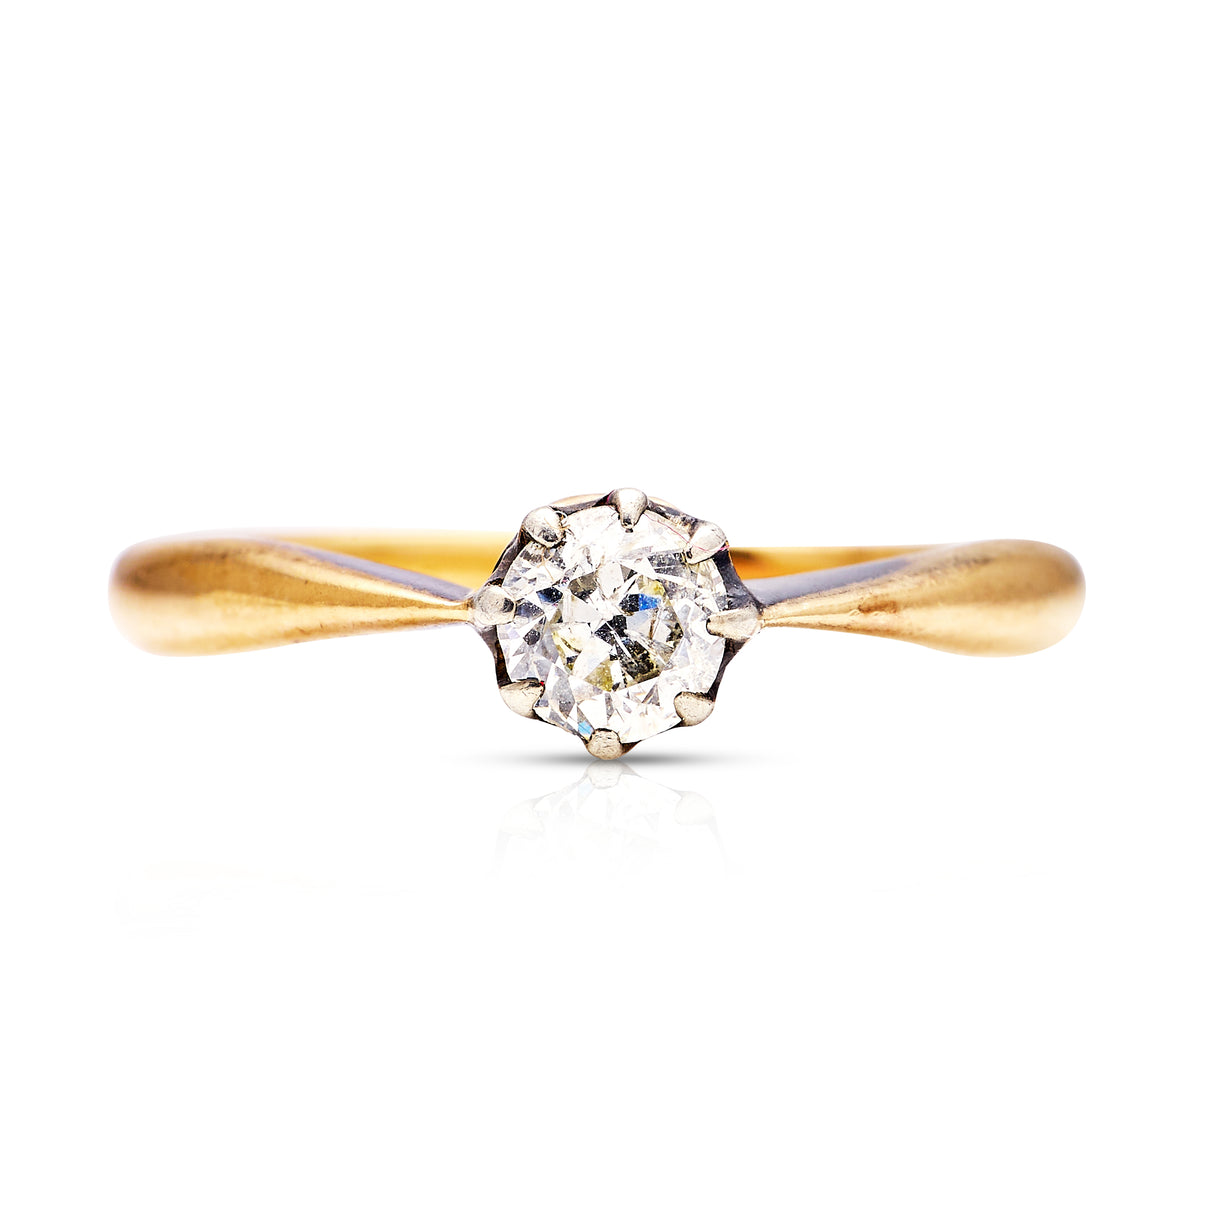 Antique, Edwardian solitaire diamond engagement ring, 18ct yellow gold